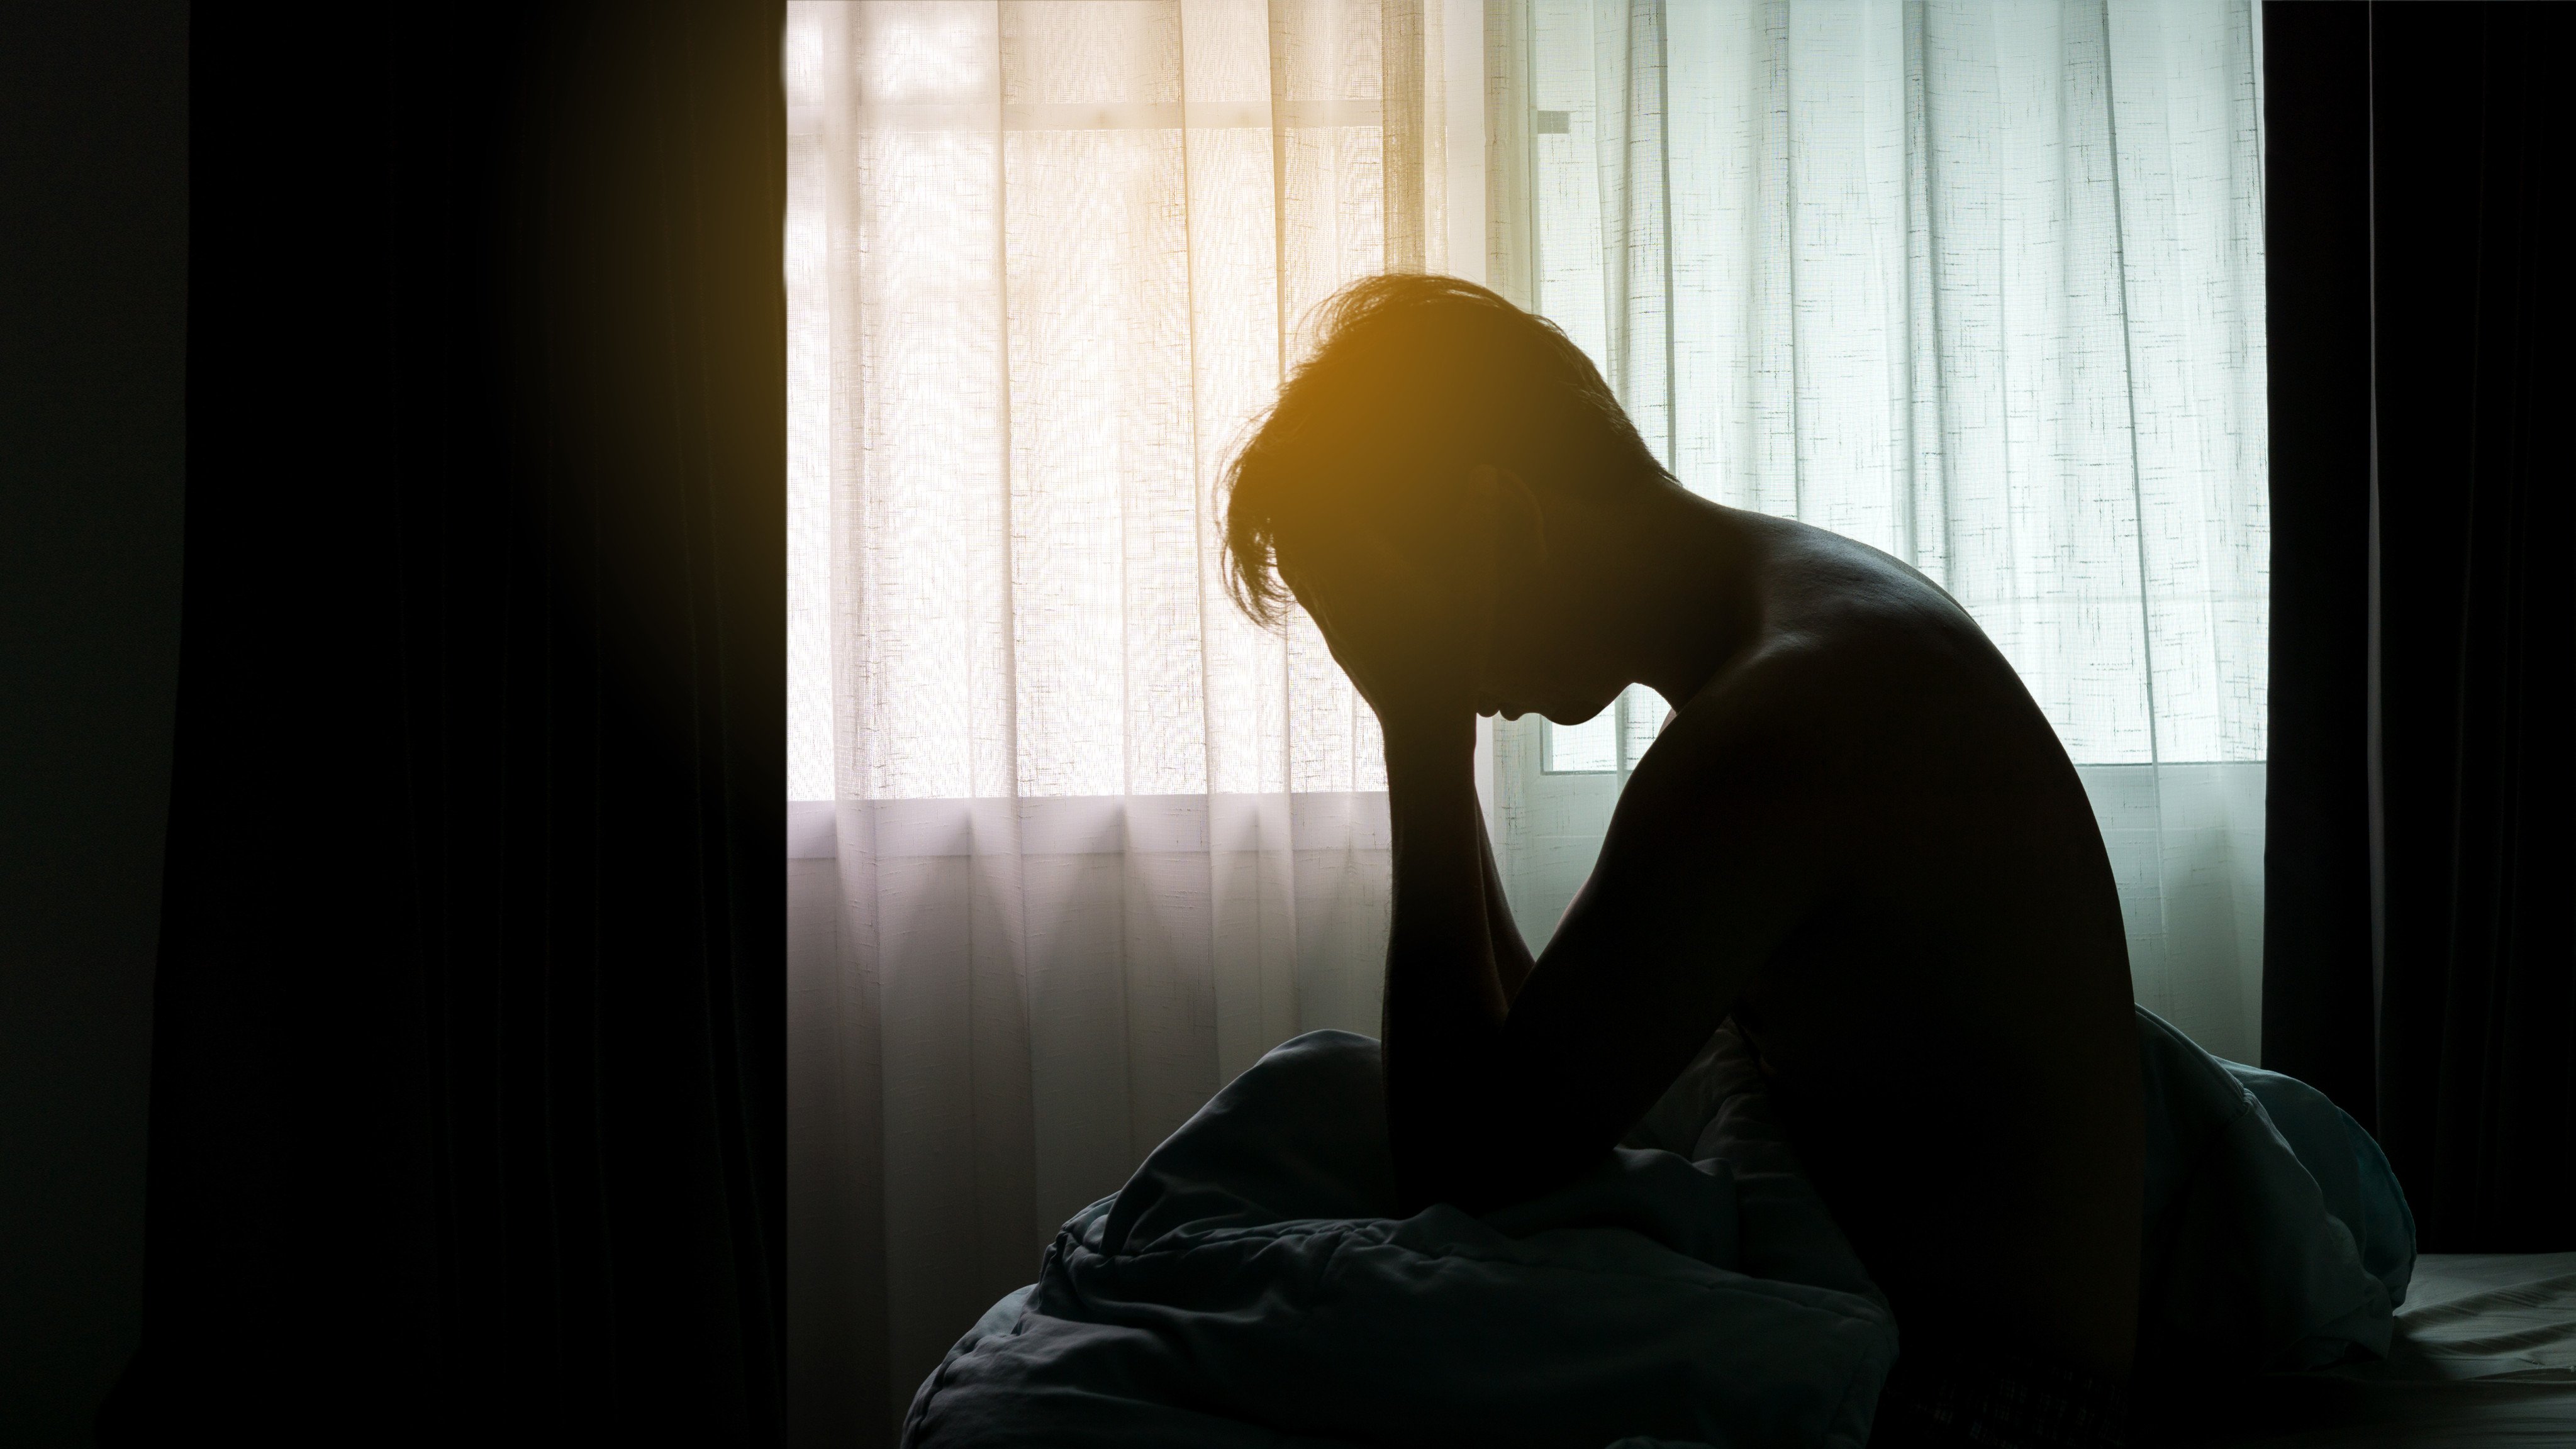 About half of US adults say they have experienced loneliness. Photo: Shutterstock